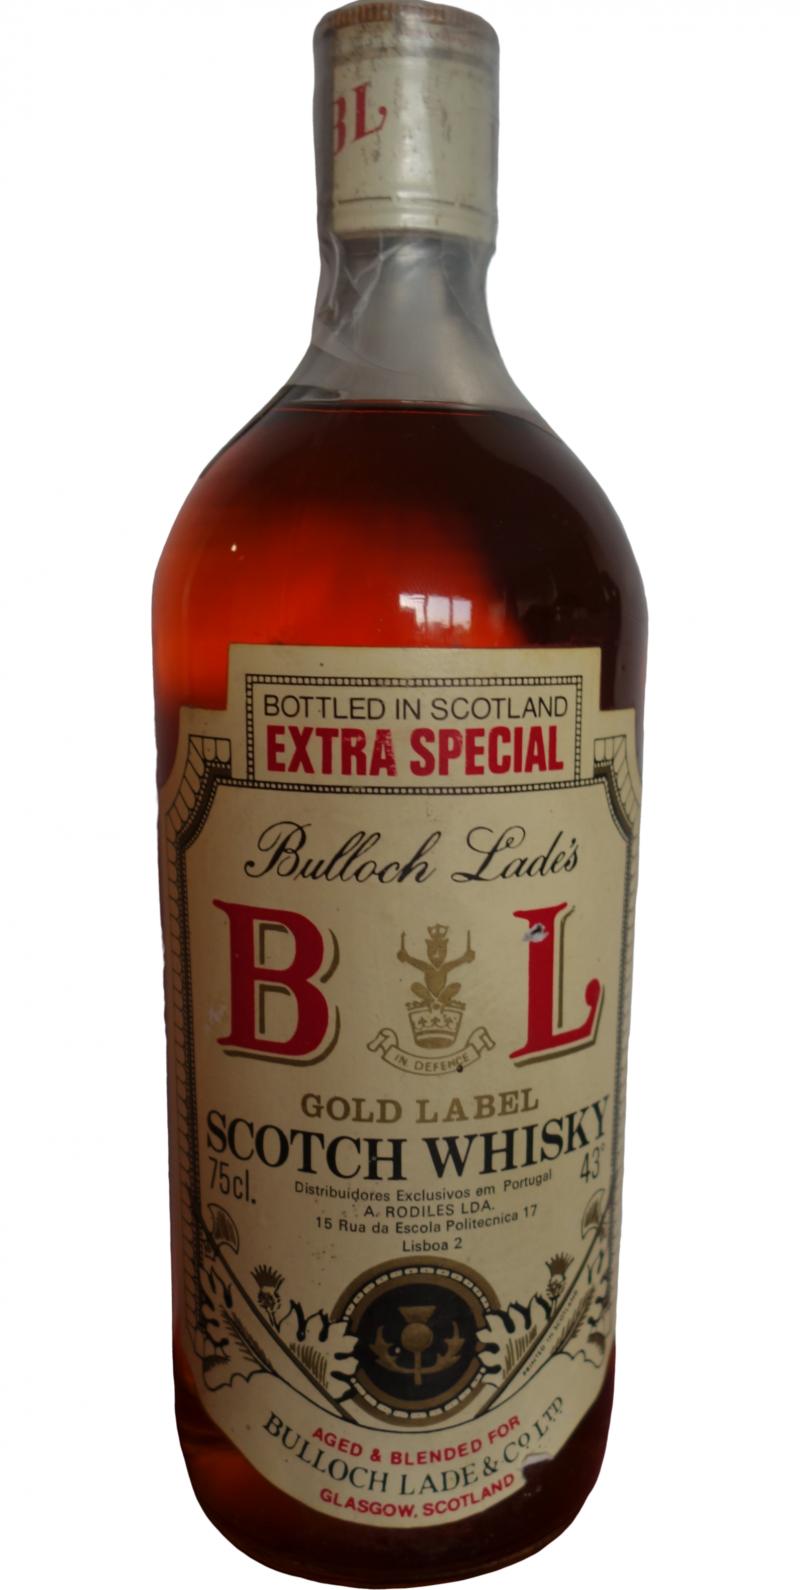 Bulloch Lade's Gold Label Extra Special A. Rodiles LDA 43% 750ml